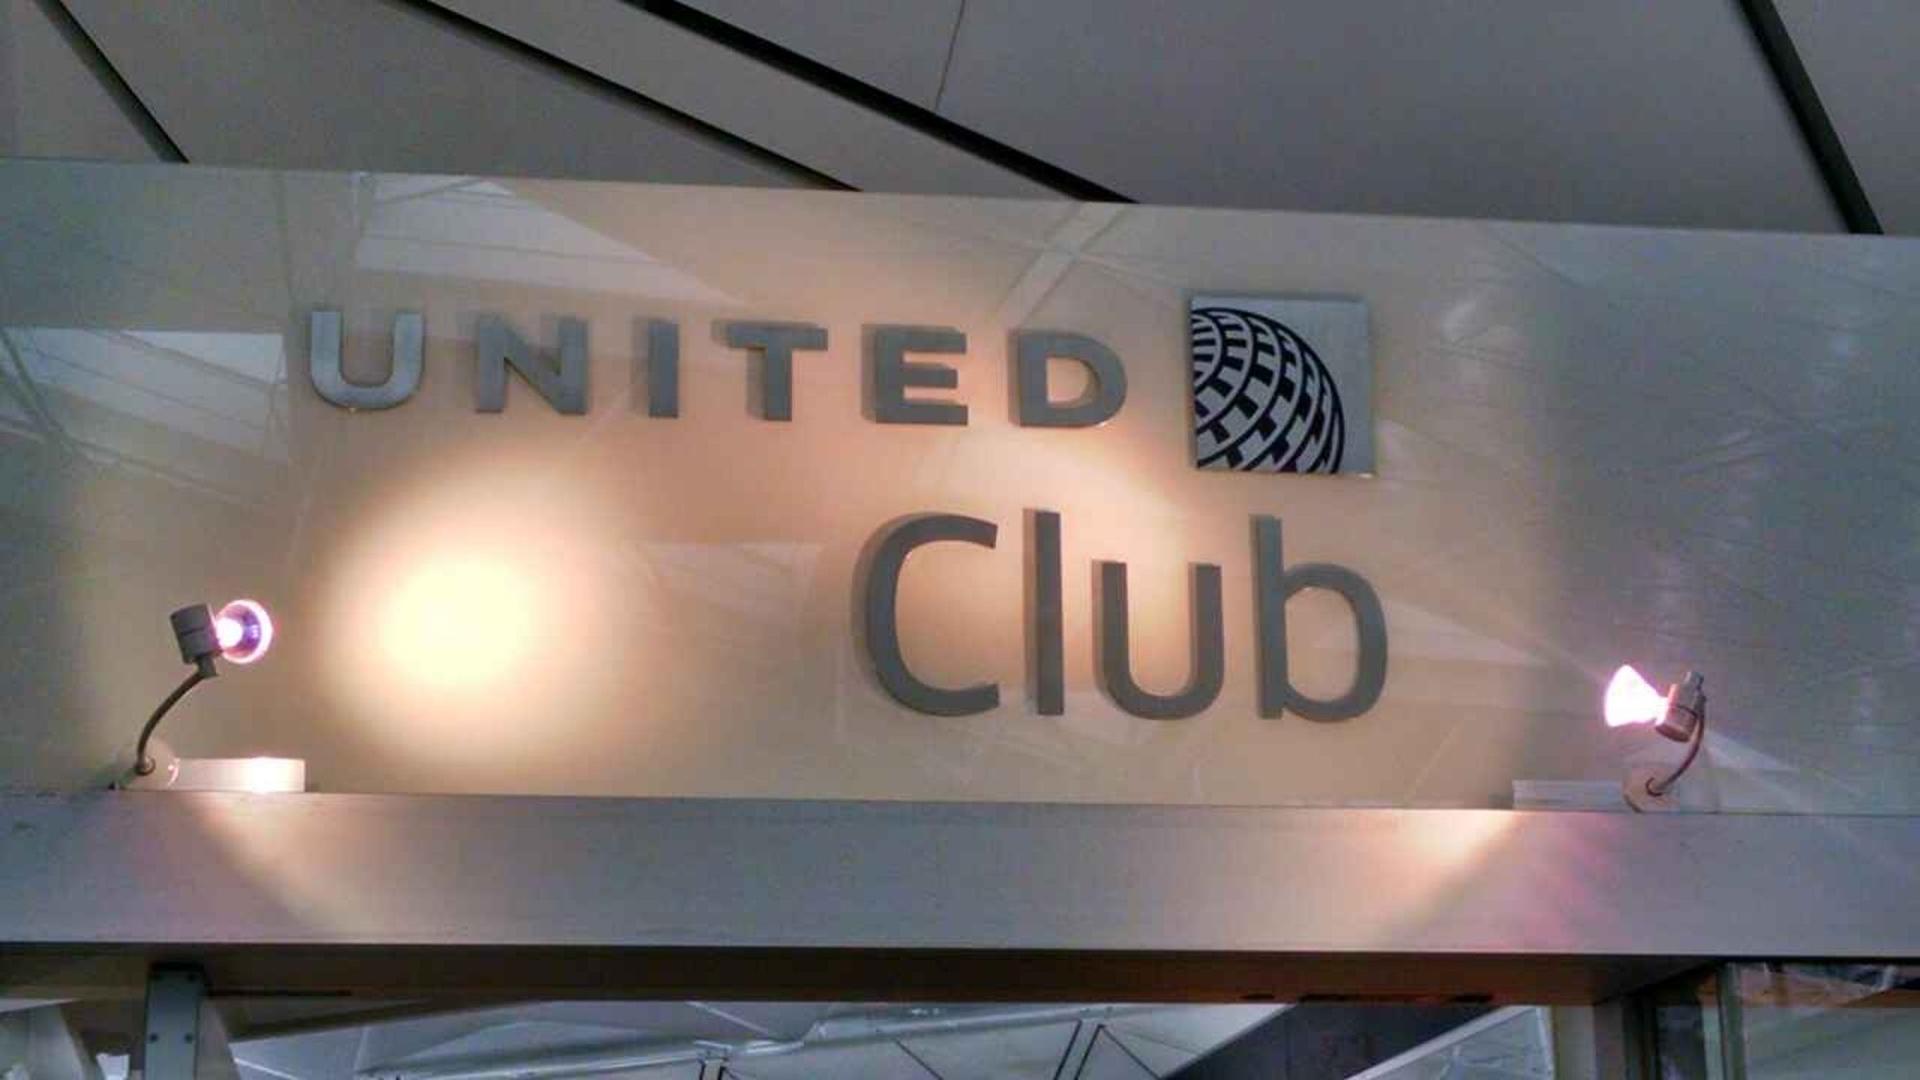 United Airlines United Club  image 19 of 28